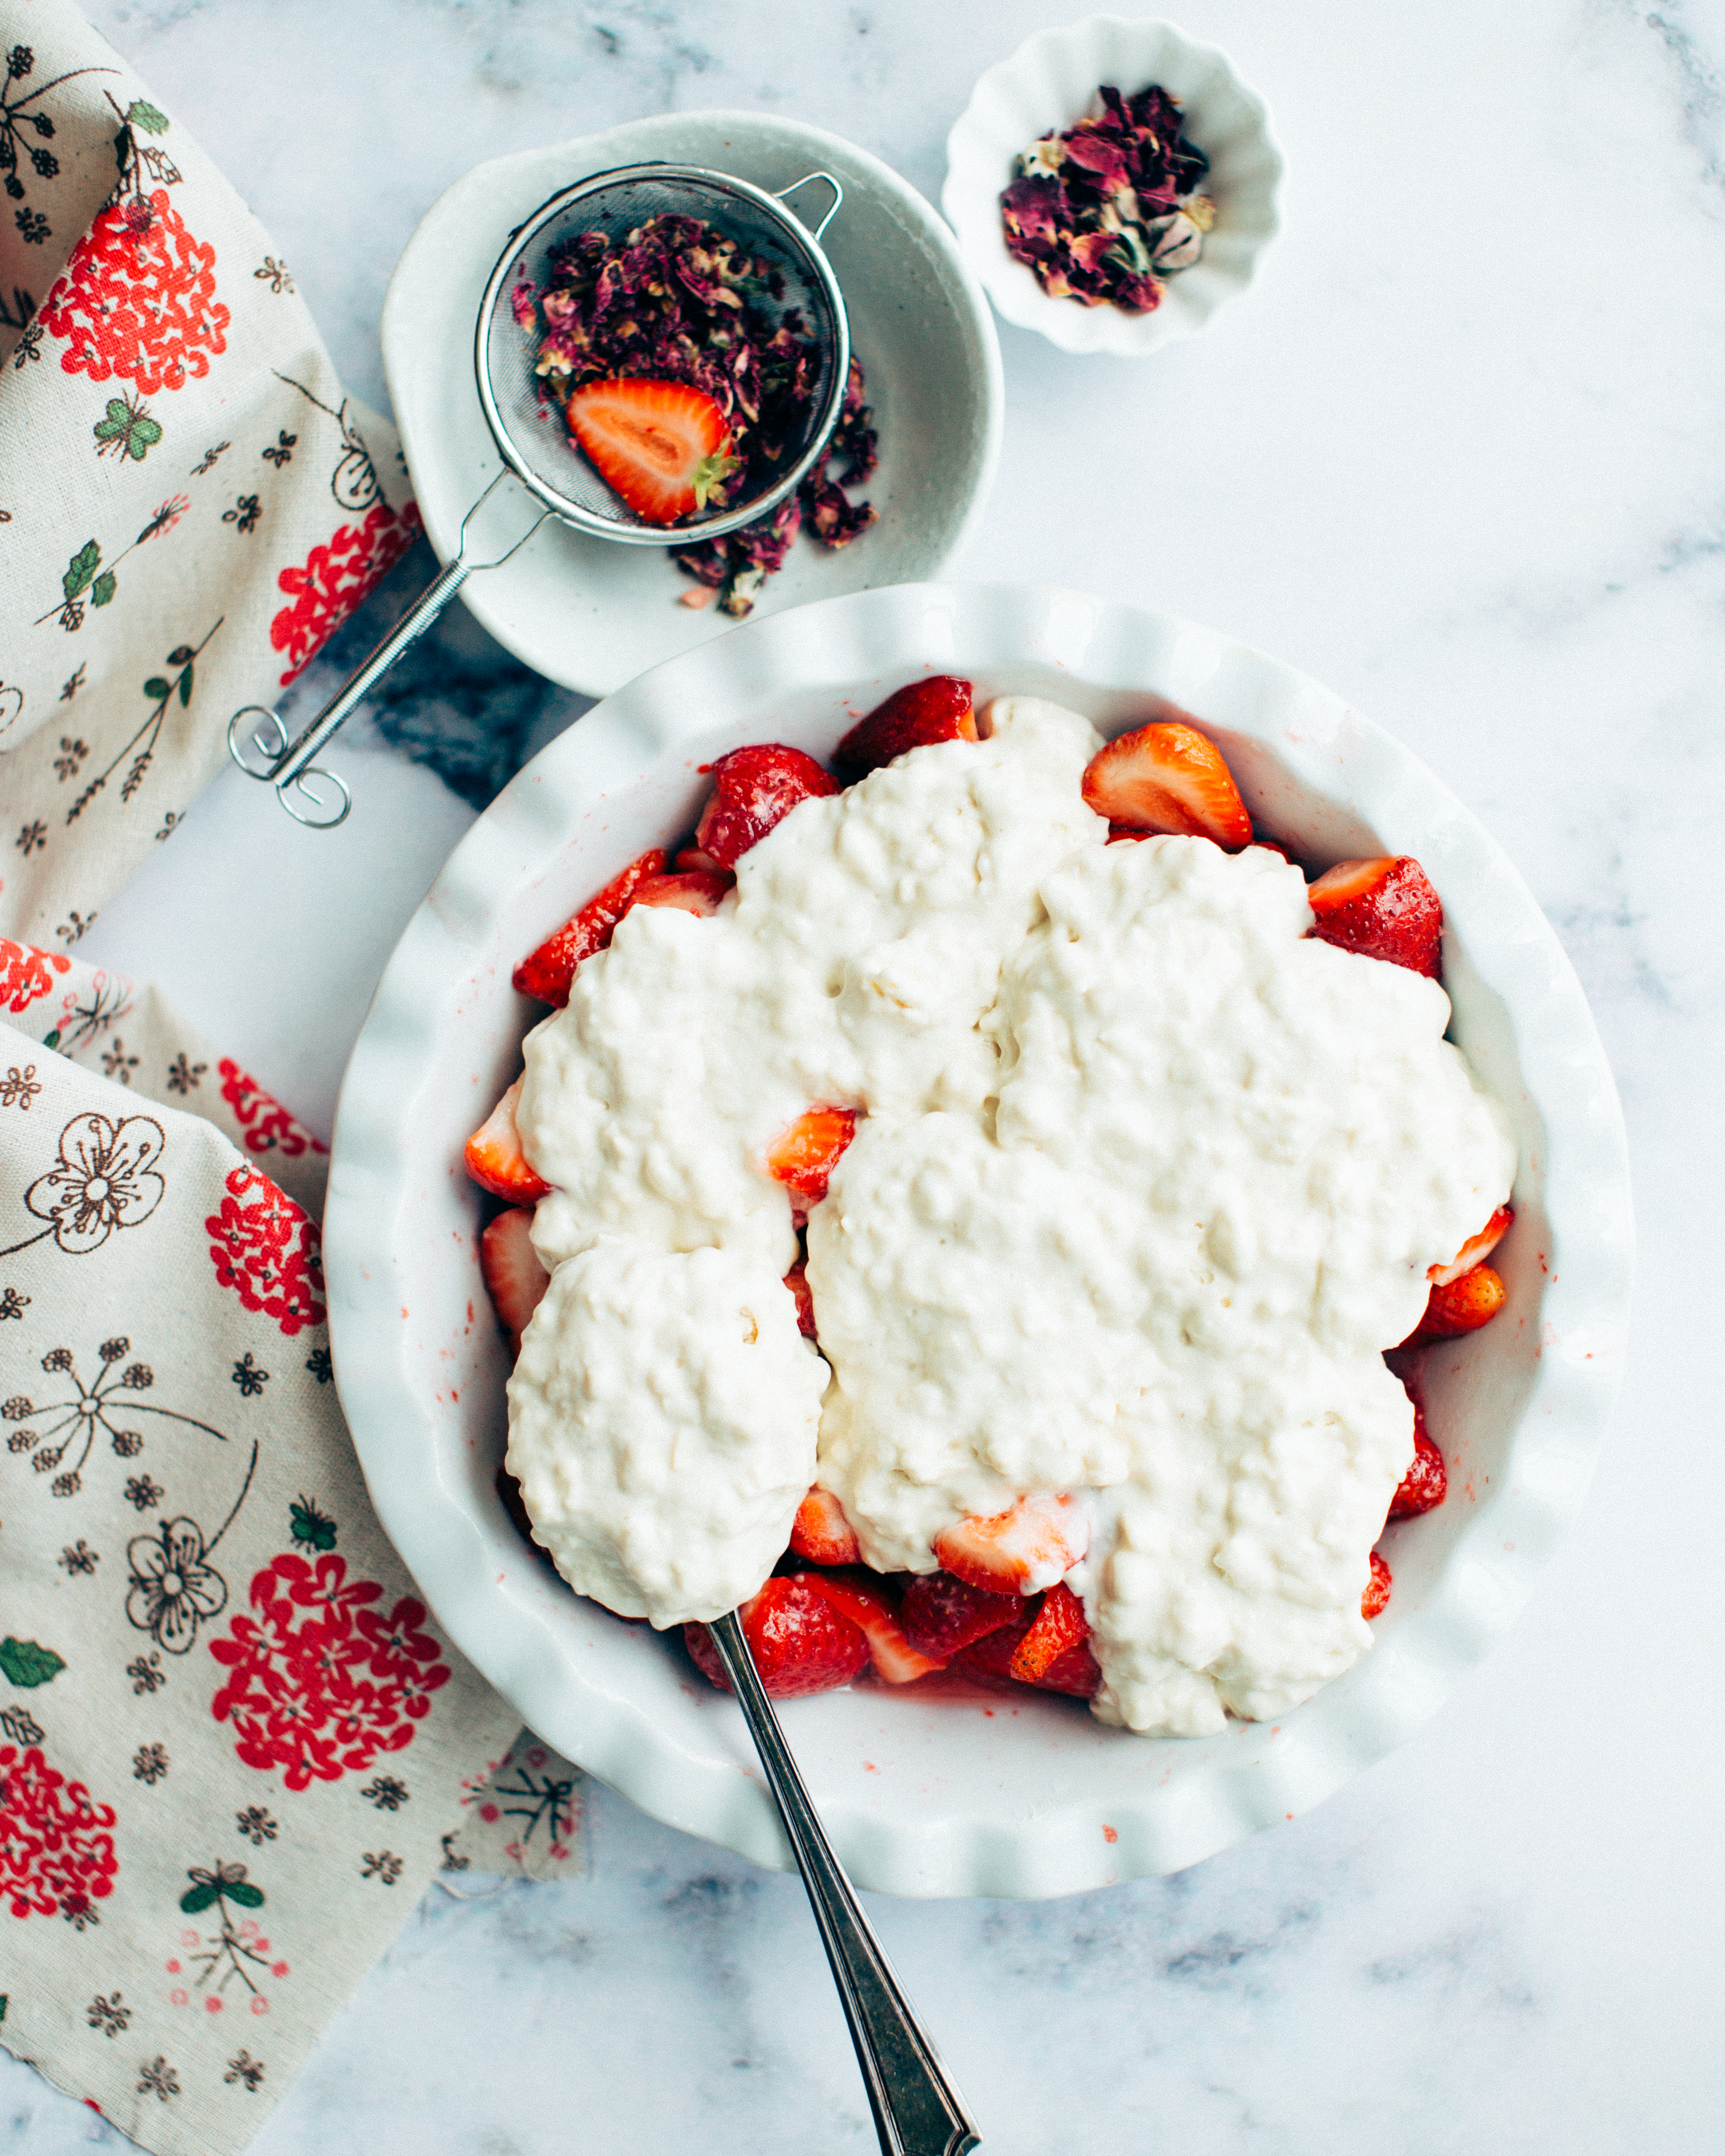 The unbaked strawberry cobbler in a baking dish.